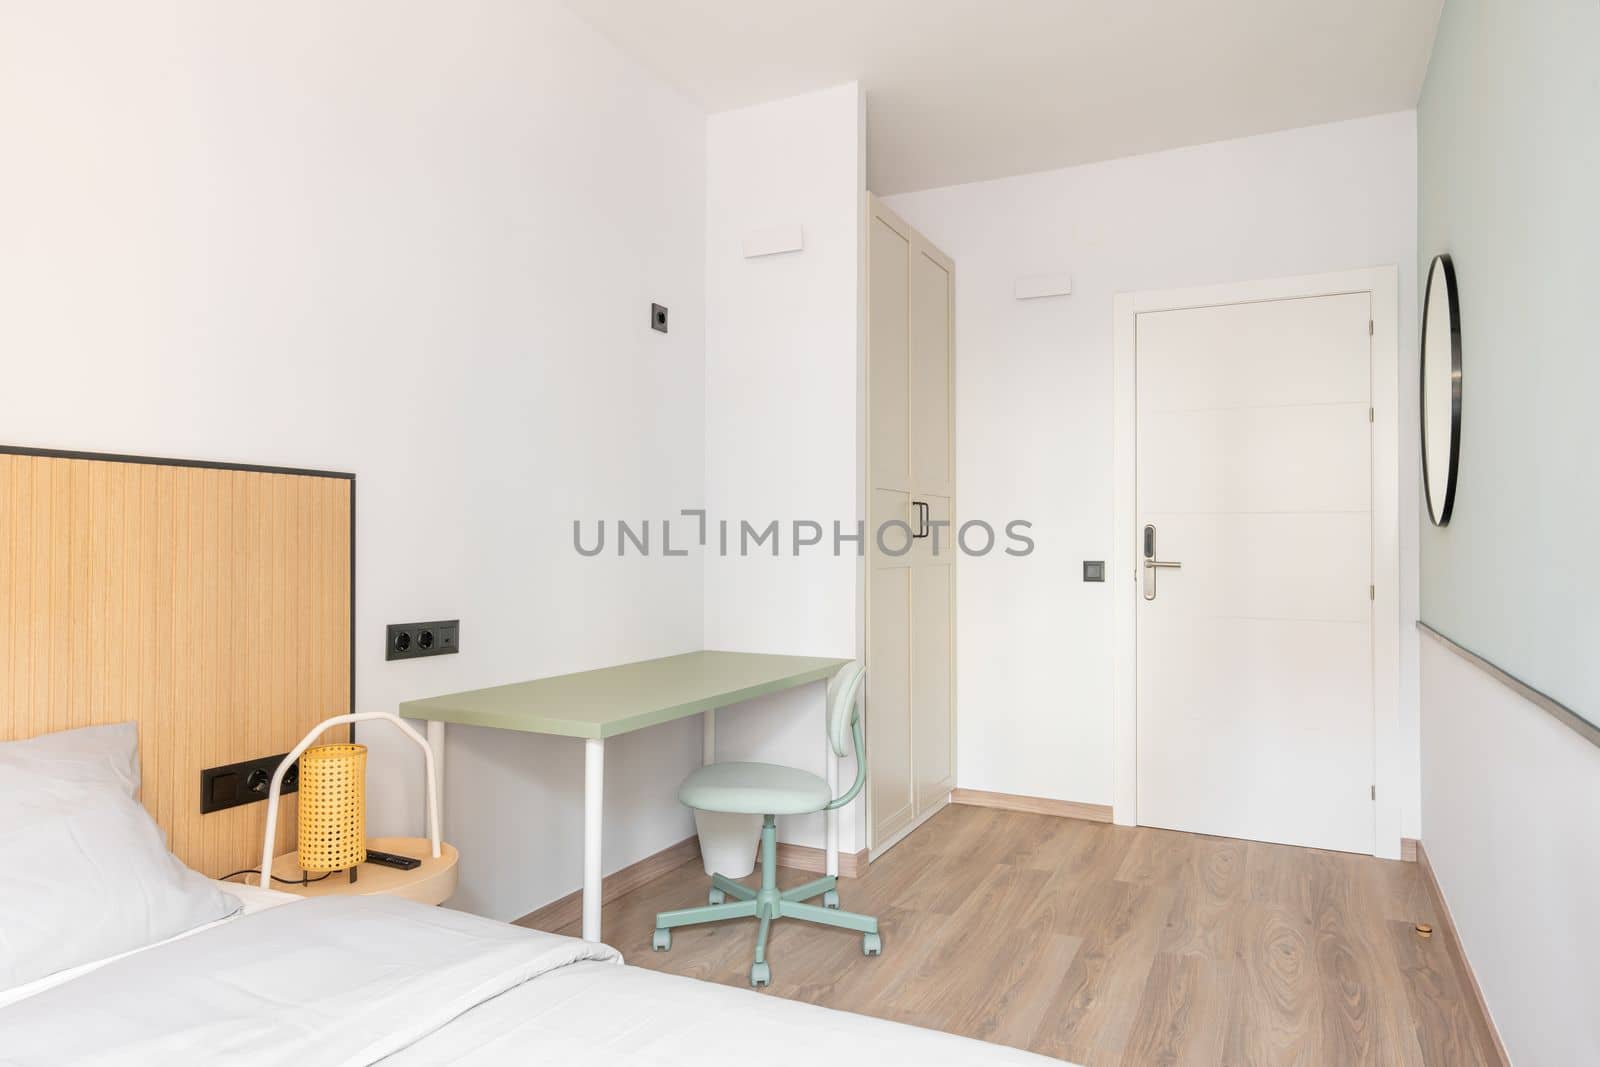 Brightly lit room with daylight bright light. Room for extended stay. Wardrobe for clothes, table and chair for working space, bed for sound sleep. Entrance door with electronic lock. by apavlin